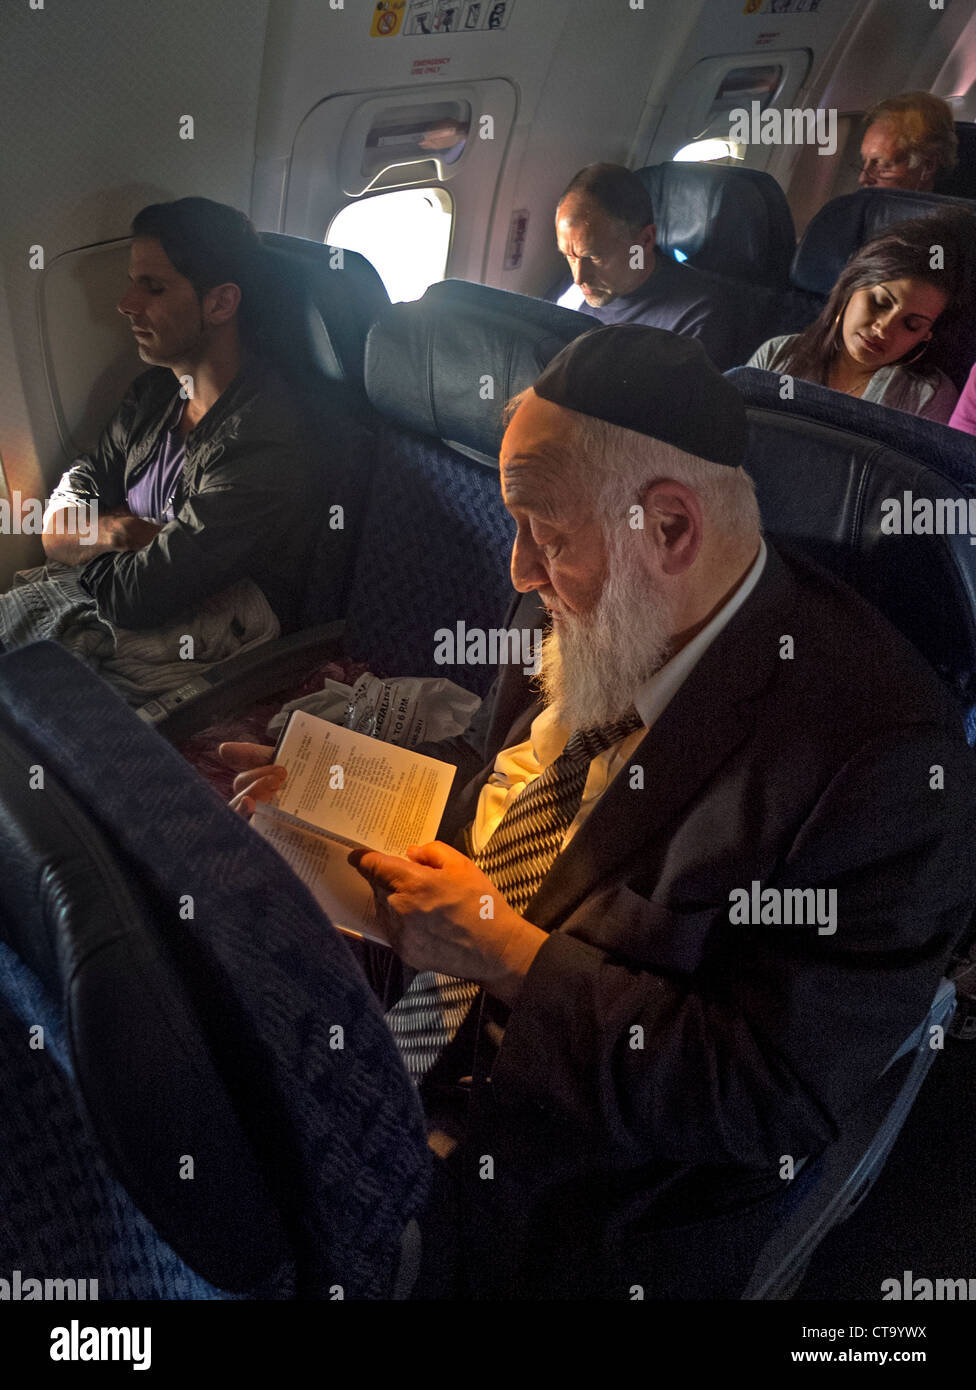 Wearing a yarmulke skull cap, an bearded Orthodox Jew reads from a book in Hebrew on an airliner while passengers sleep. Stock Photo